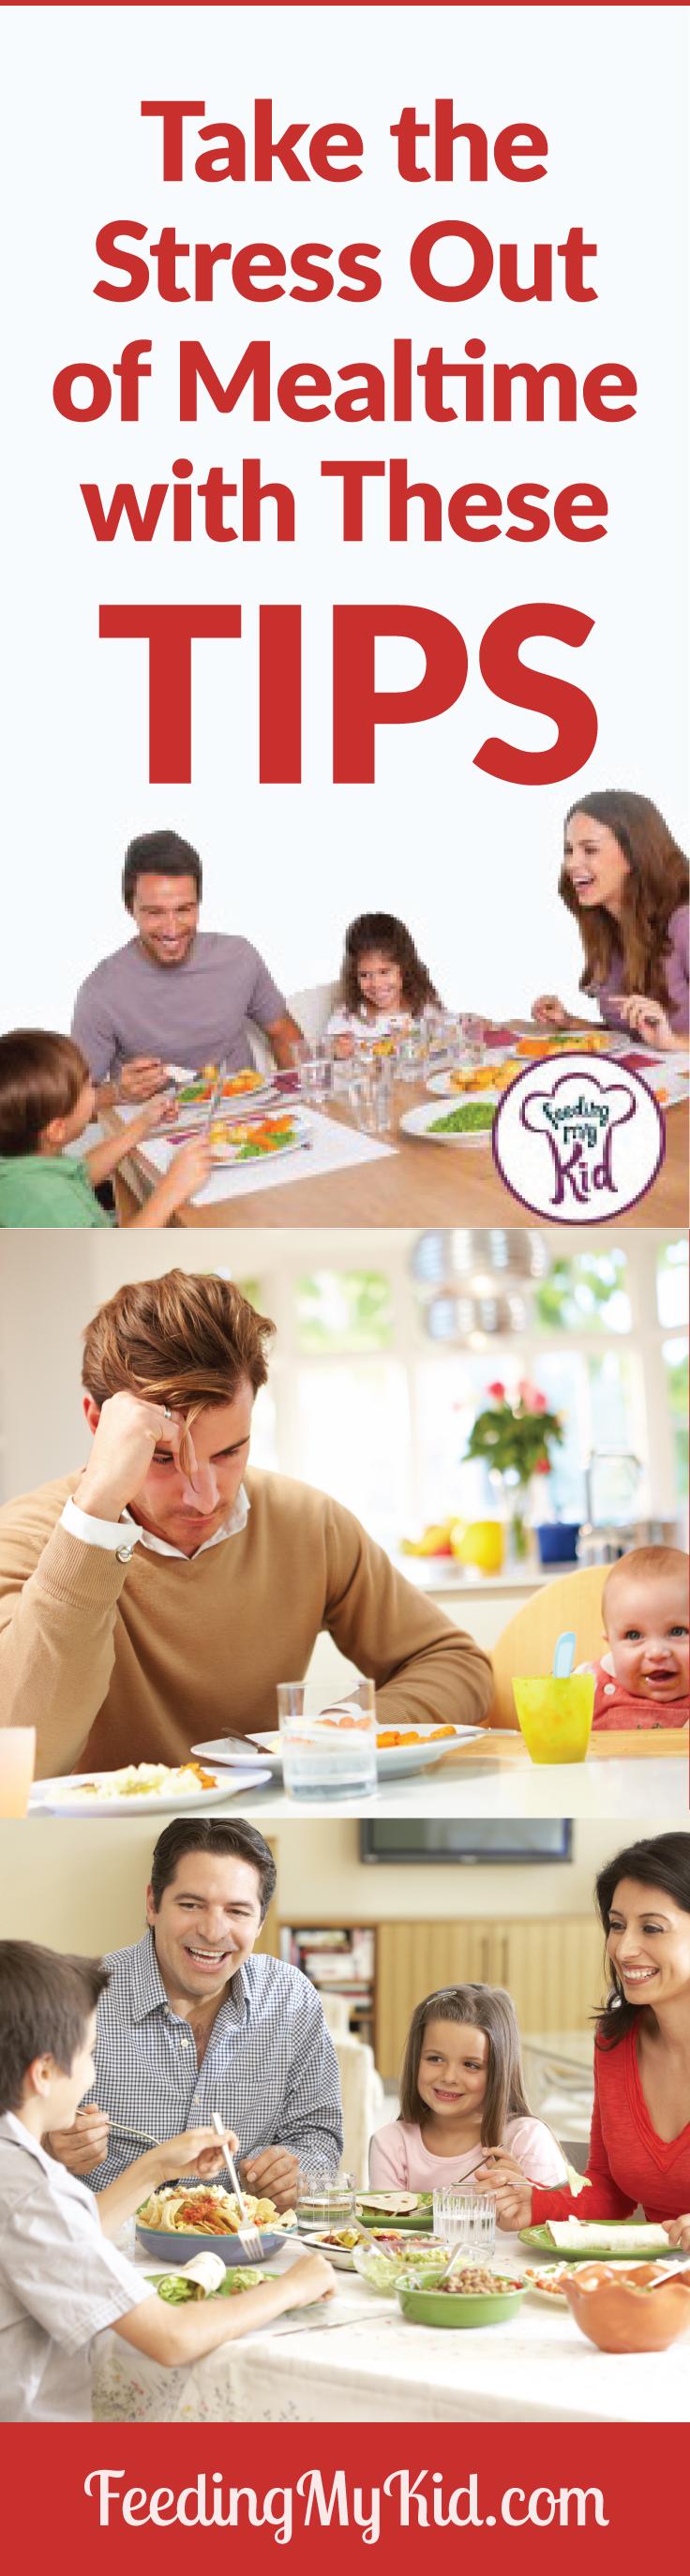 Many parents will take mealtime is the most stressful time of the day for them. Find out how to Take the Stress Out of Mealtimes.